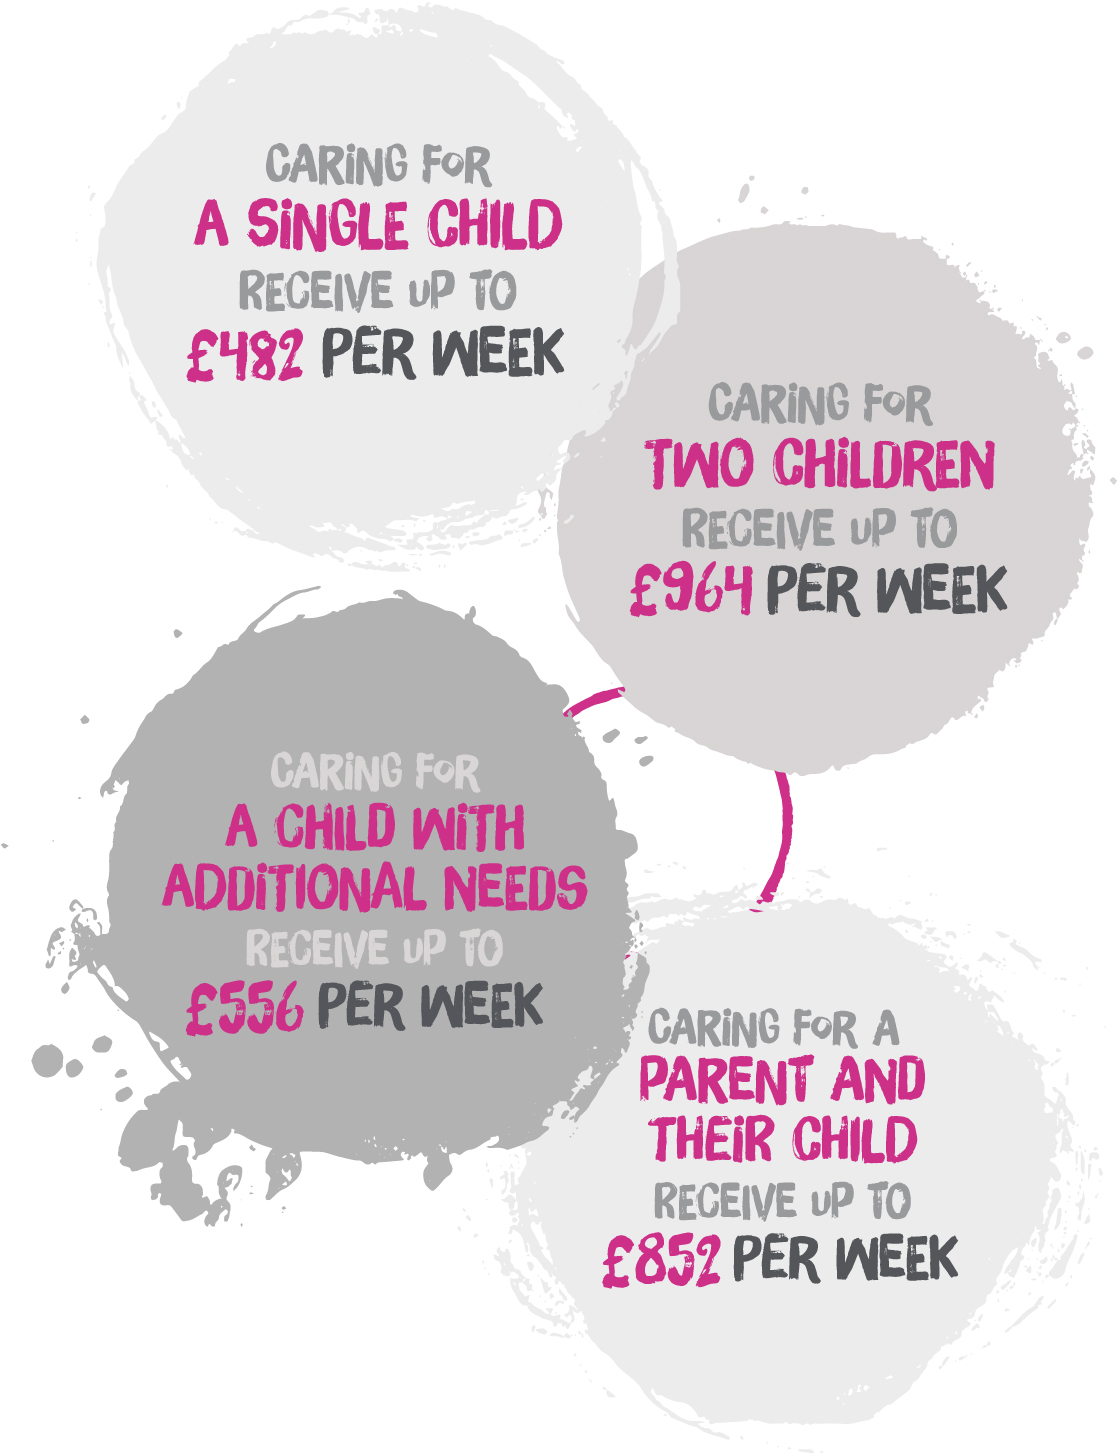 These are our fees if you're thinking of fostering in Coventry